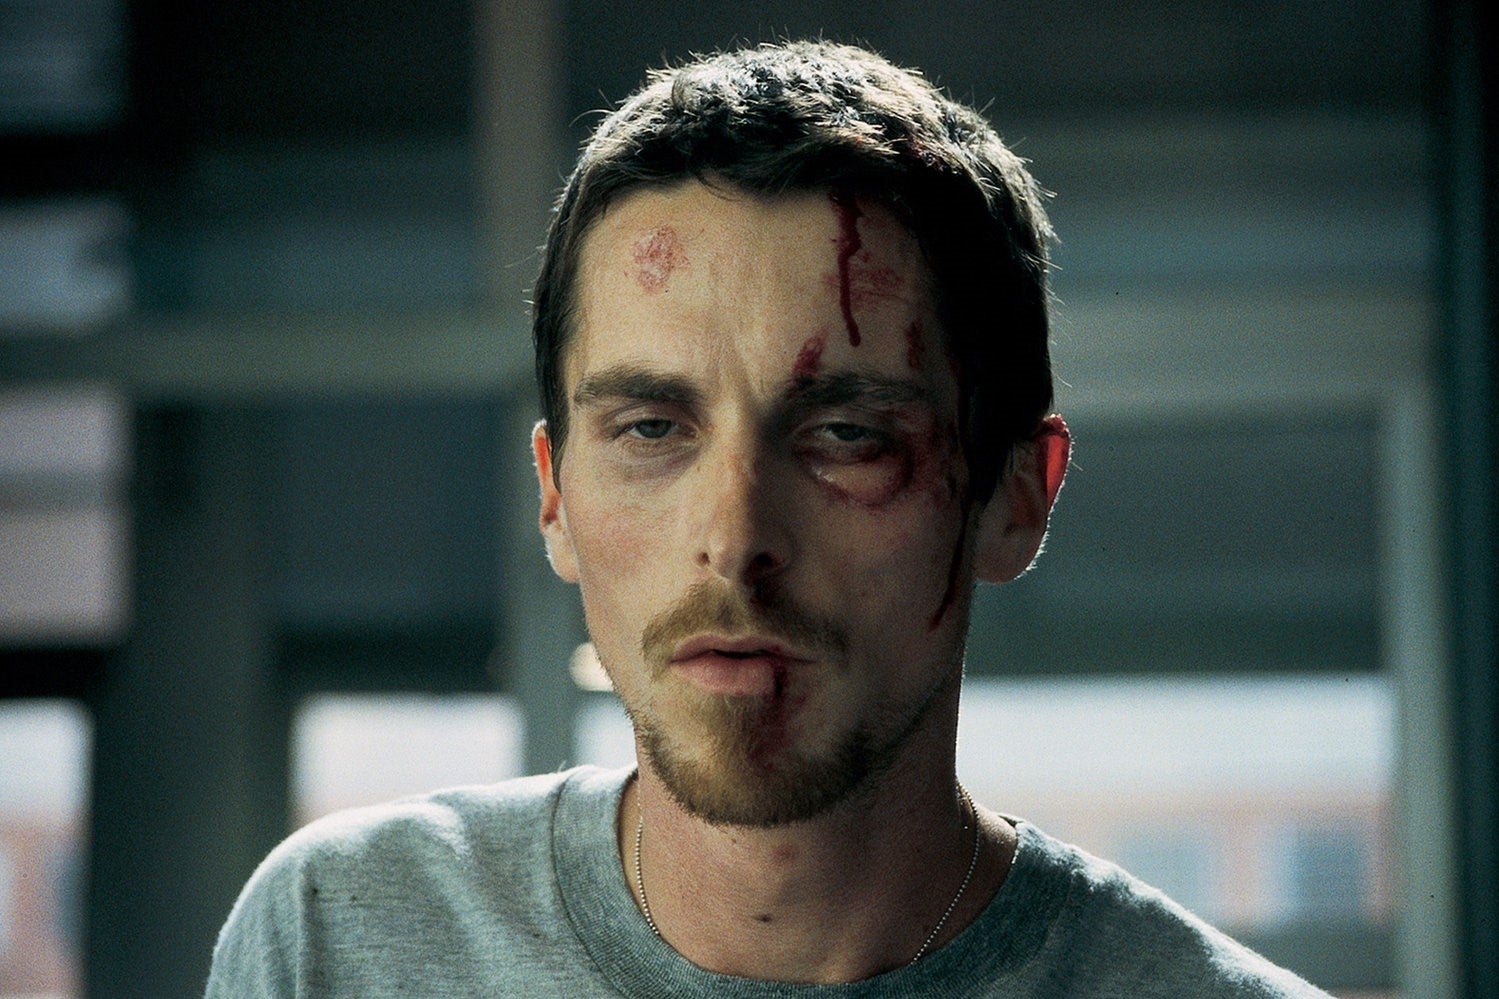 A medium close-up of an emaciated Christian Bale with scars and bruises all over his face staring ahead in a daze.